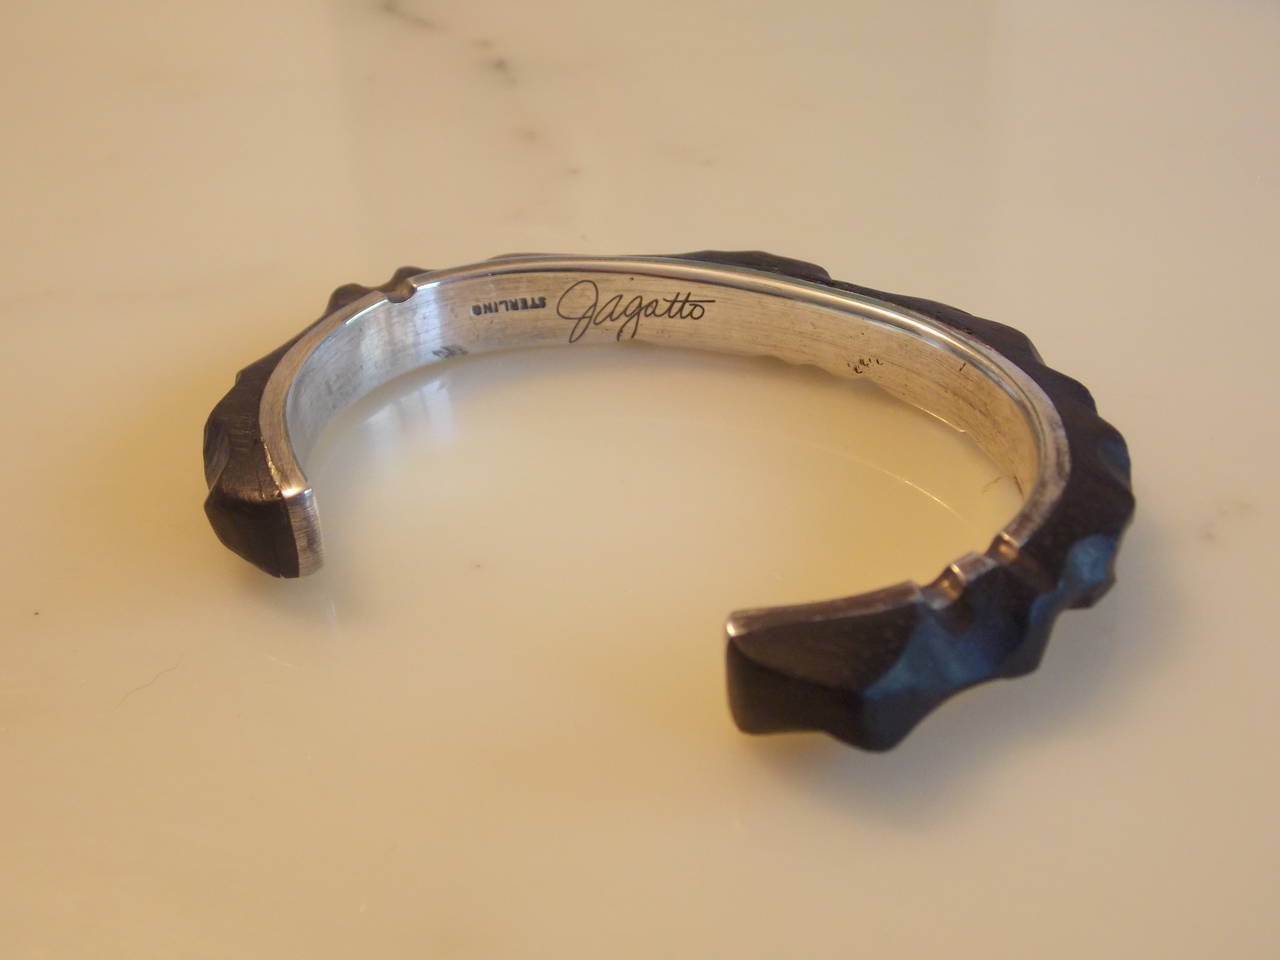 American Sterling Silver and Ebony Wood Sculpture Bracelet Design by Joseph Gatto